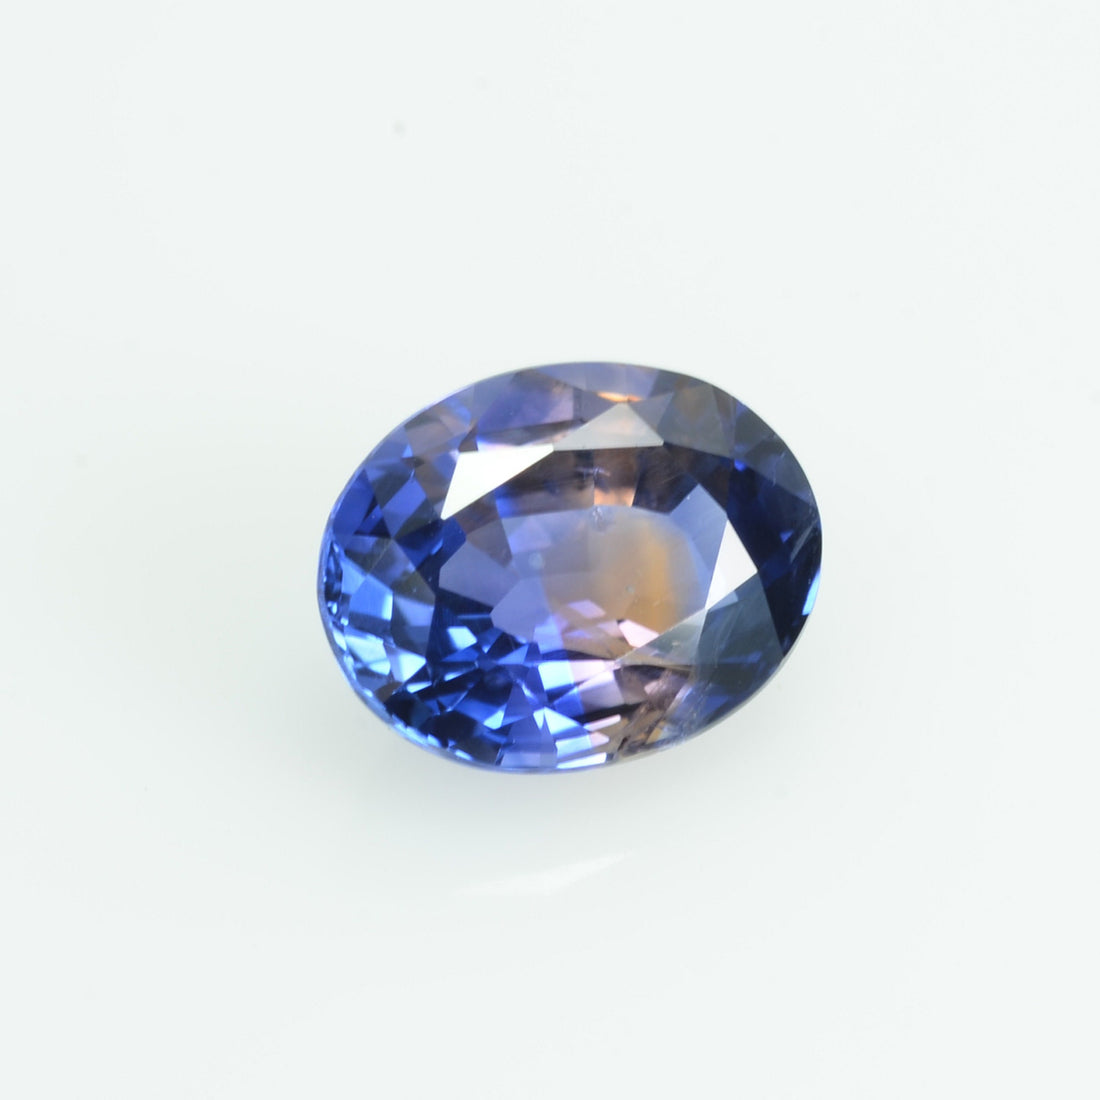 1.46 cts Natural Fancy Bi-Color Sapphire Loose Gemstone oval Cut